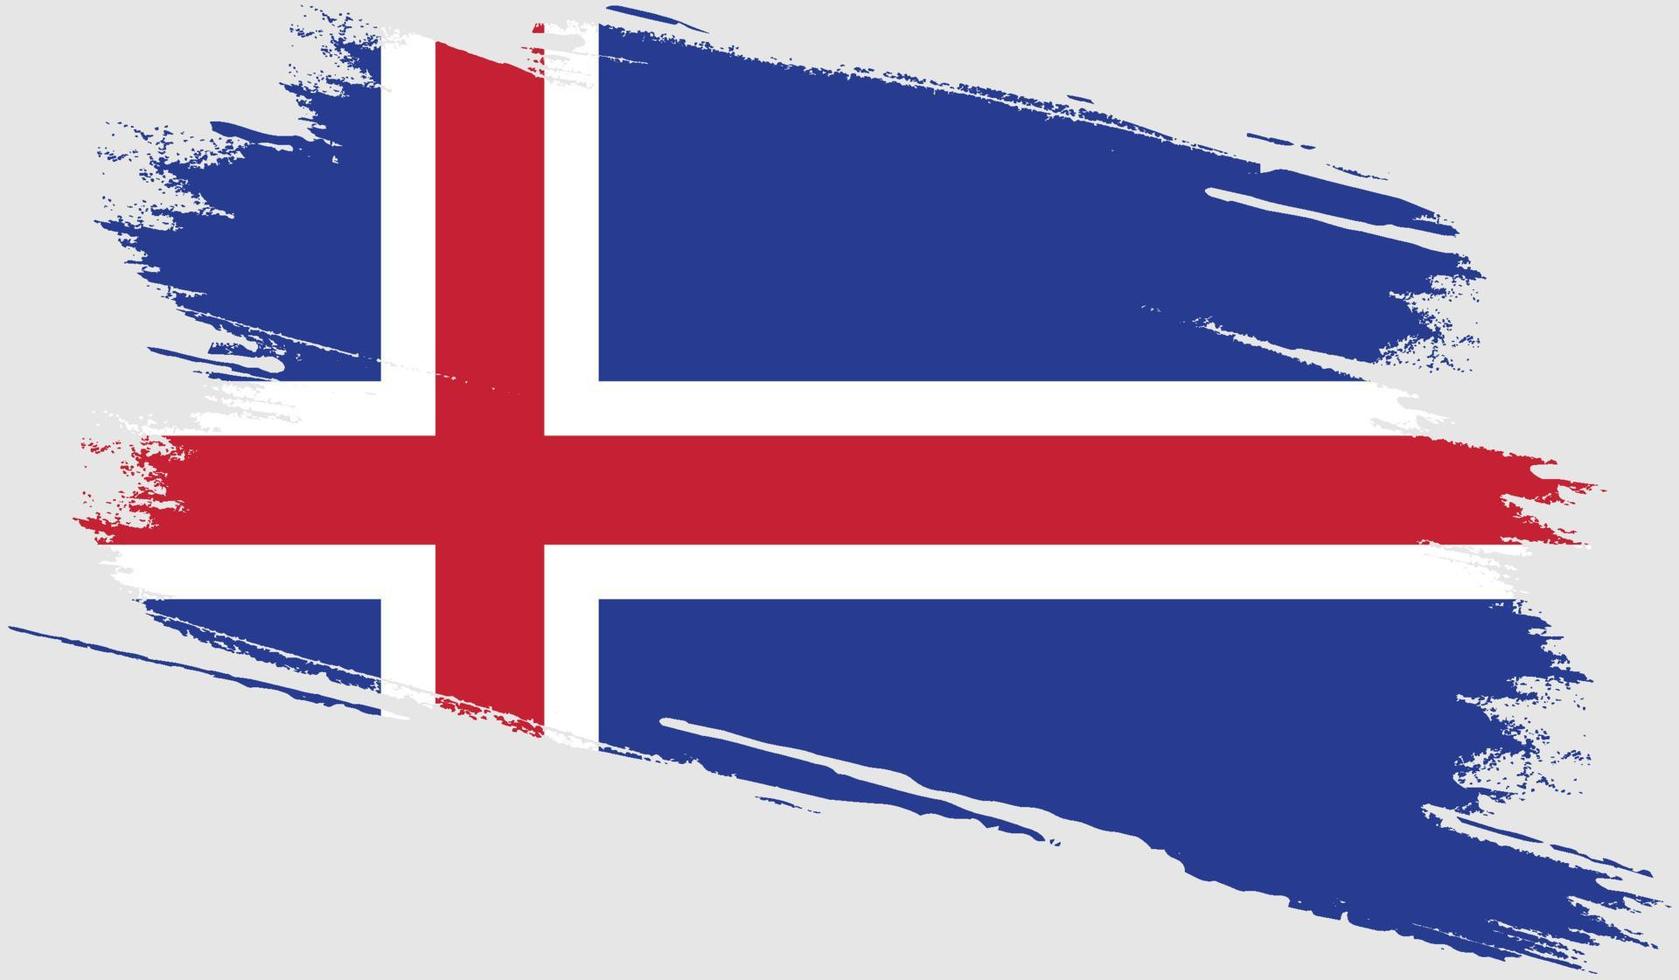 Iceland flag with grunge texture vector